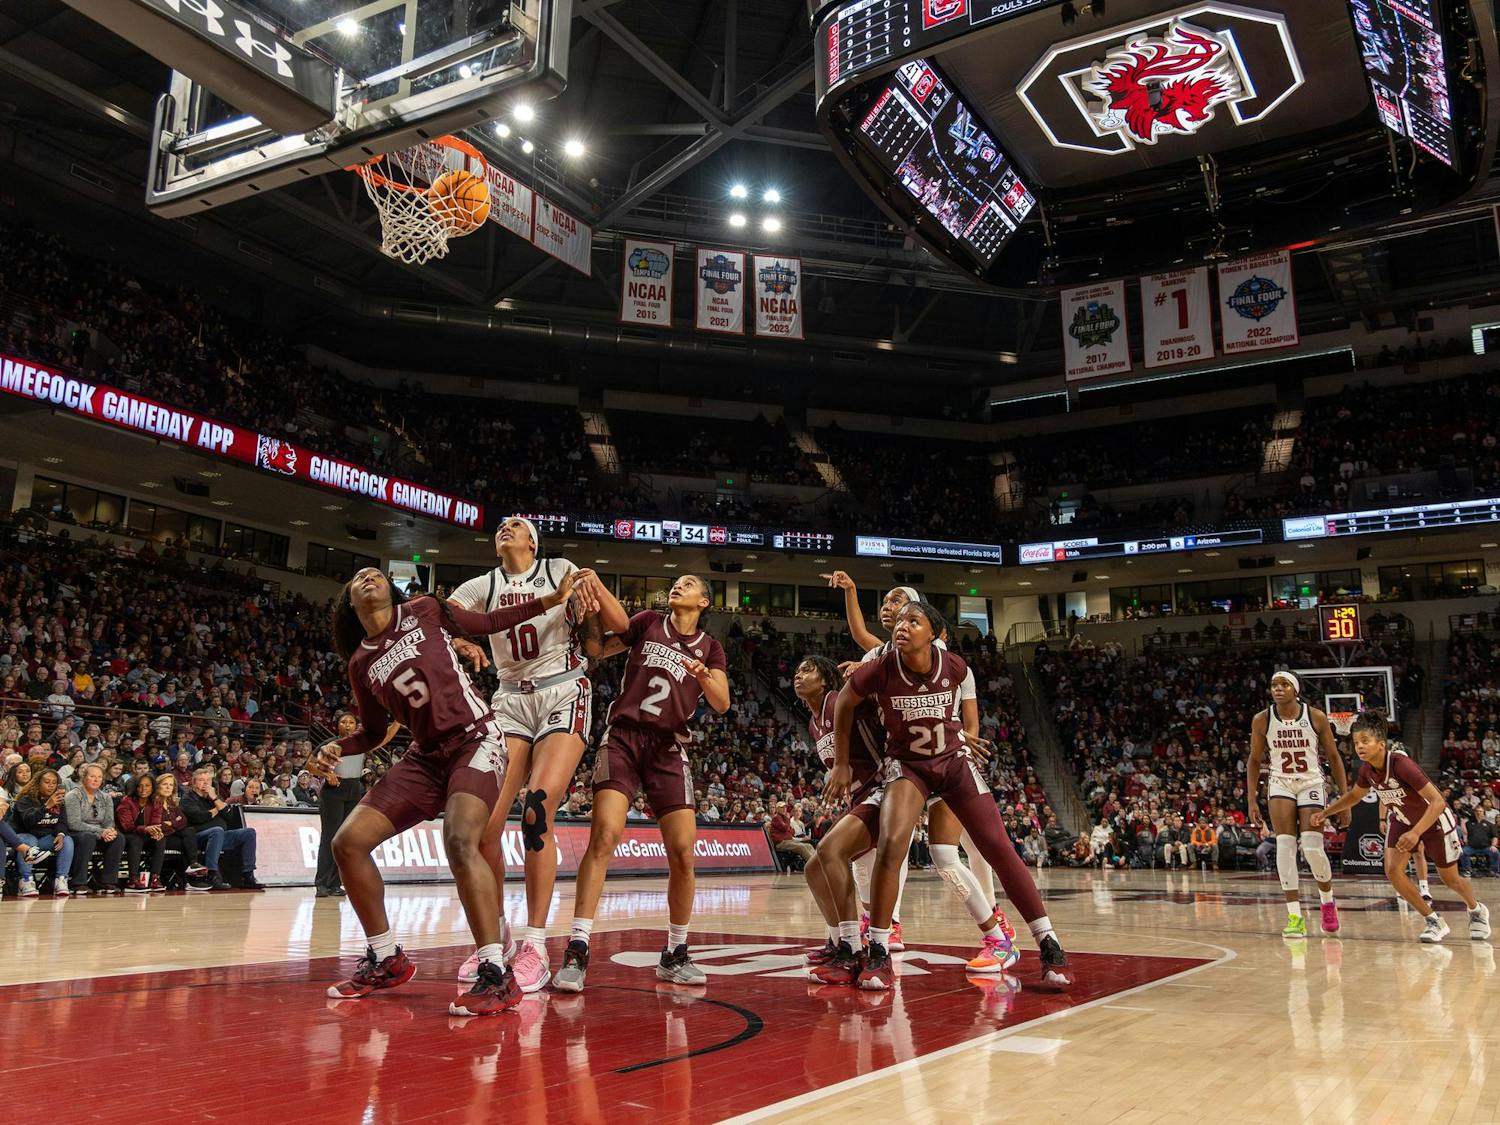 Sophomore forward Ashlyn Watkins makes a free throw in a game against Mississippi State at Colonial Life Arena on Jan. 7, 2024. The Gamecocks' 85-66 win over the Mississippi State Bulldogs left the team 14-0 overall and 2-0 in SEC play.